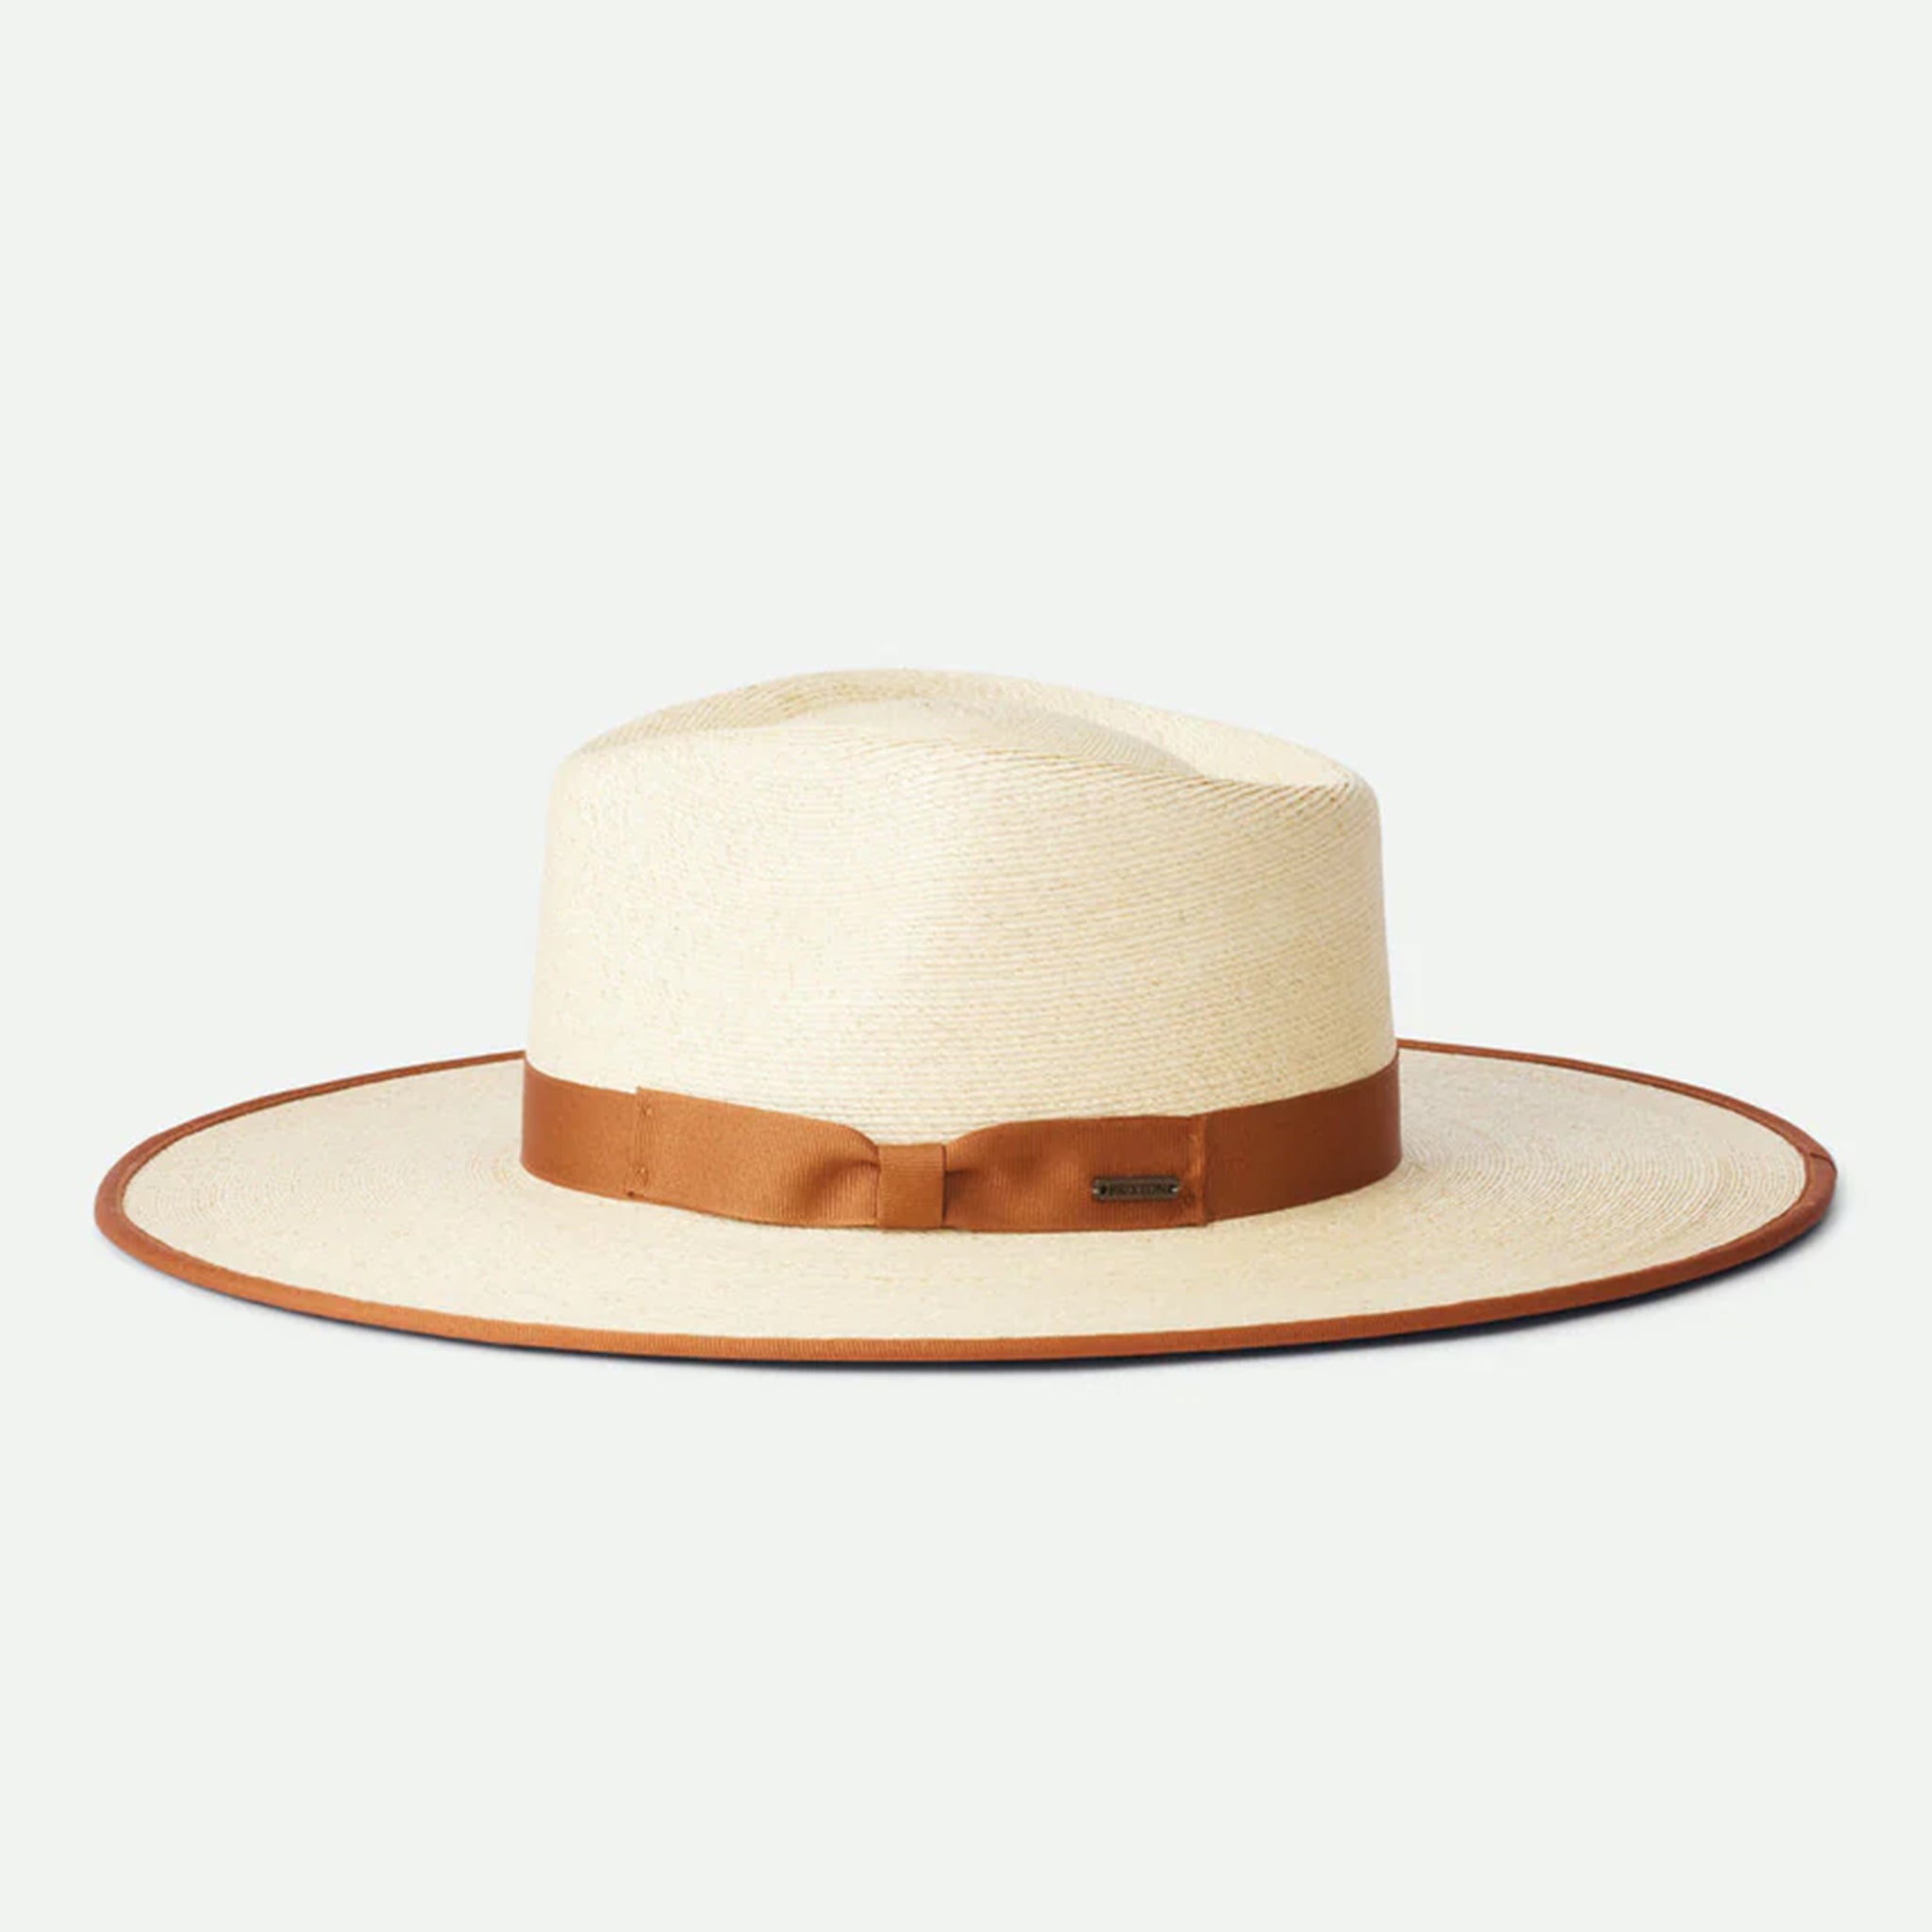 A neutral tan and natural colored rancher hat.